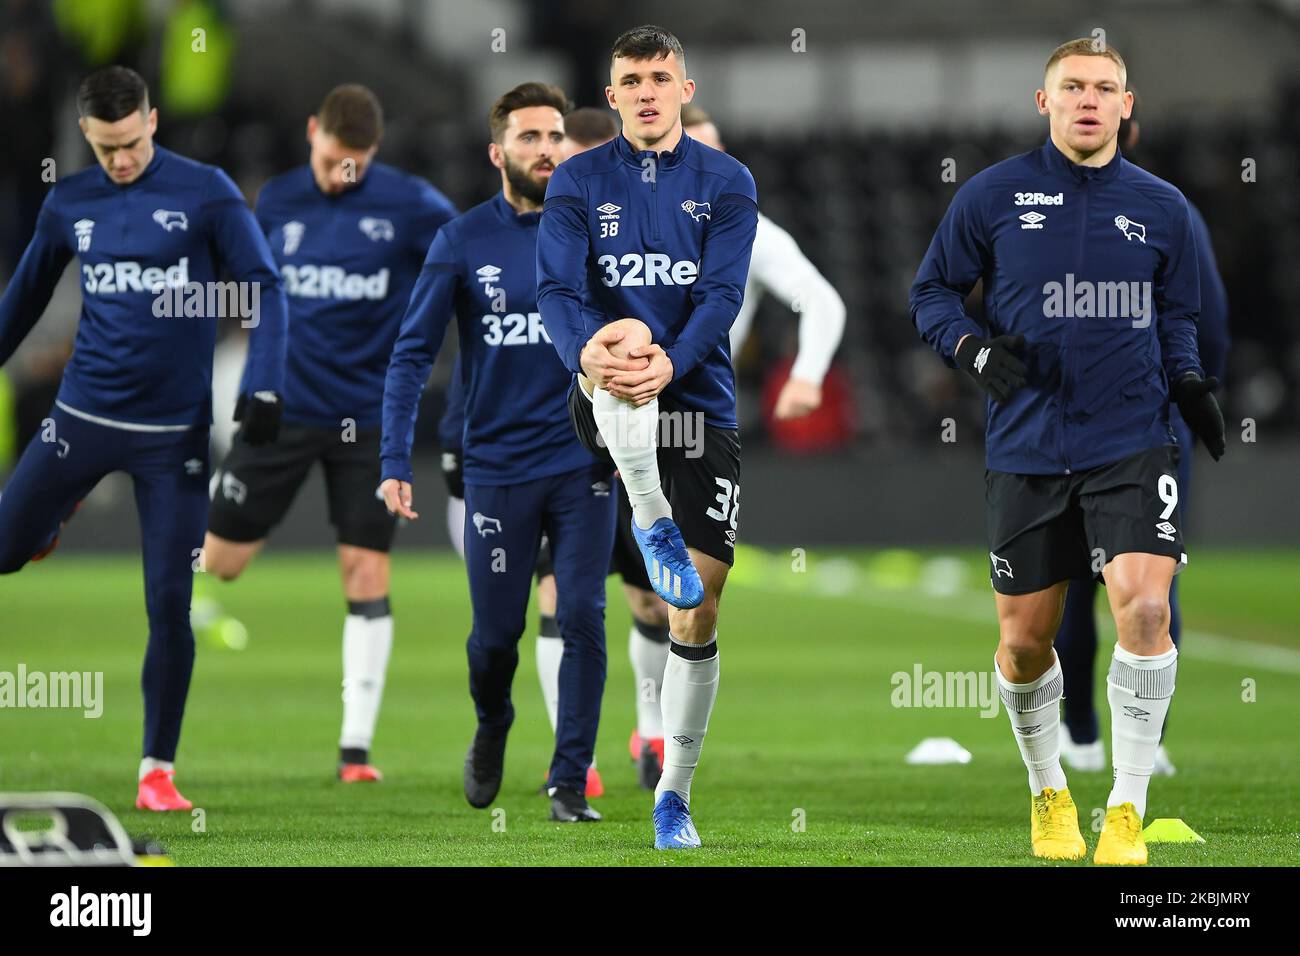 Jason Knight (38) of Derby County warms up during the FA Cup match between Derby County and Manchester United at the Pride Park, Derby on Thursday 5th March 2020. (Photo by Jon Hobley/MI News/NurPhoto) Stock Photo